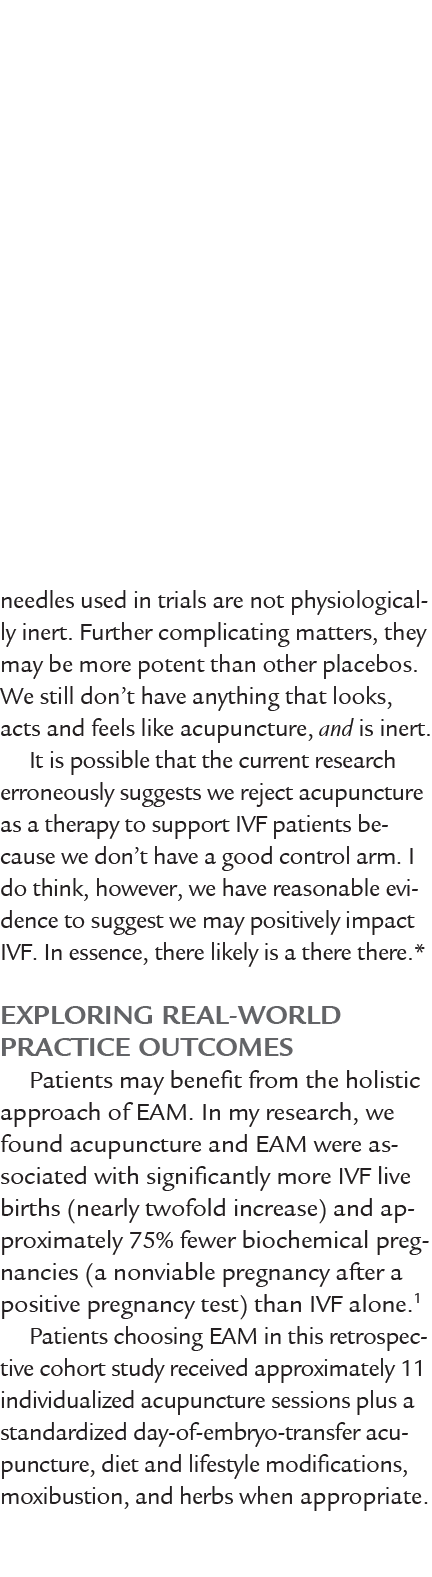 needles used in trials are not physiologically inert. Further complicating matters, they may be more potent than othe...